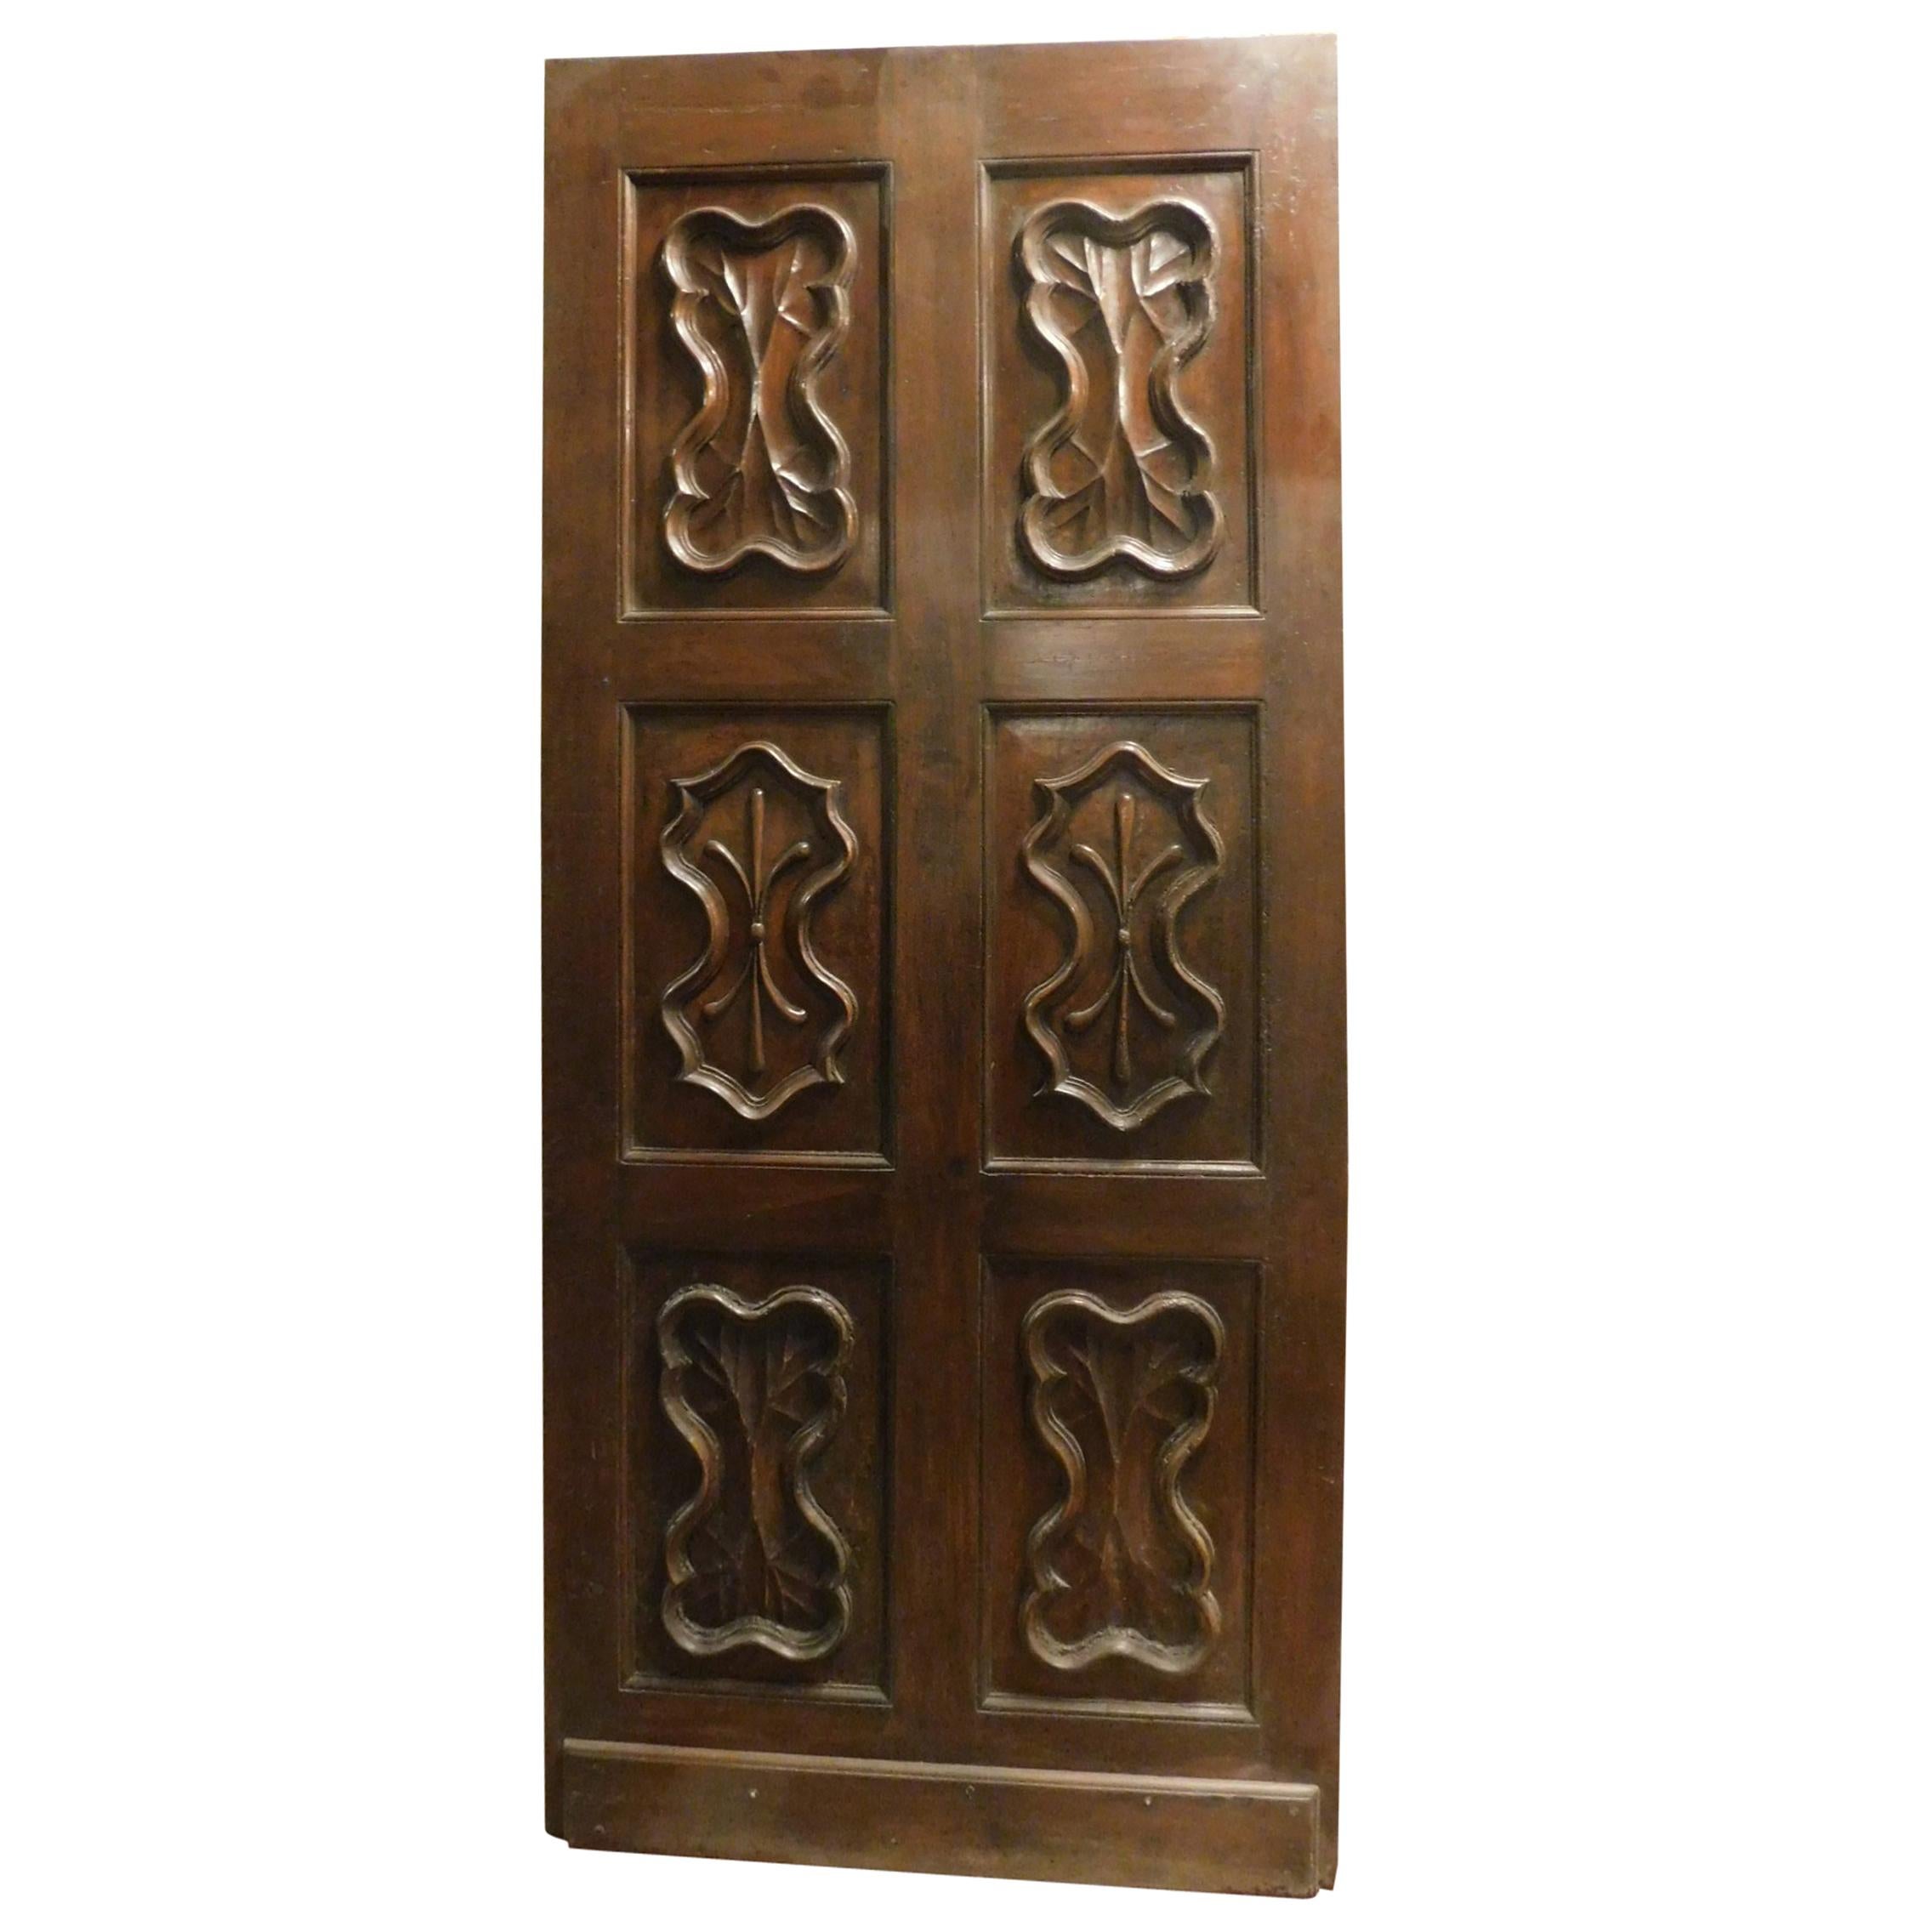 Antique Brown Wood Thin Door Carved, Italy 1700, Walnut Elegant with Spider Web